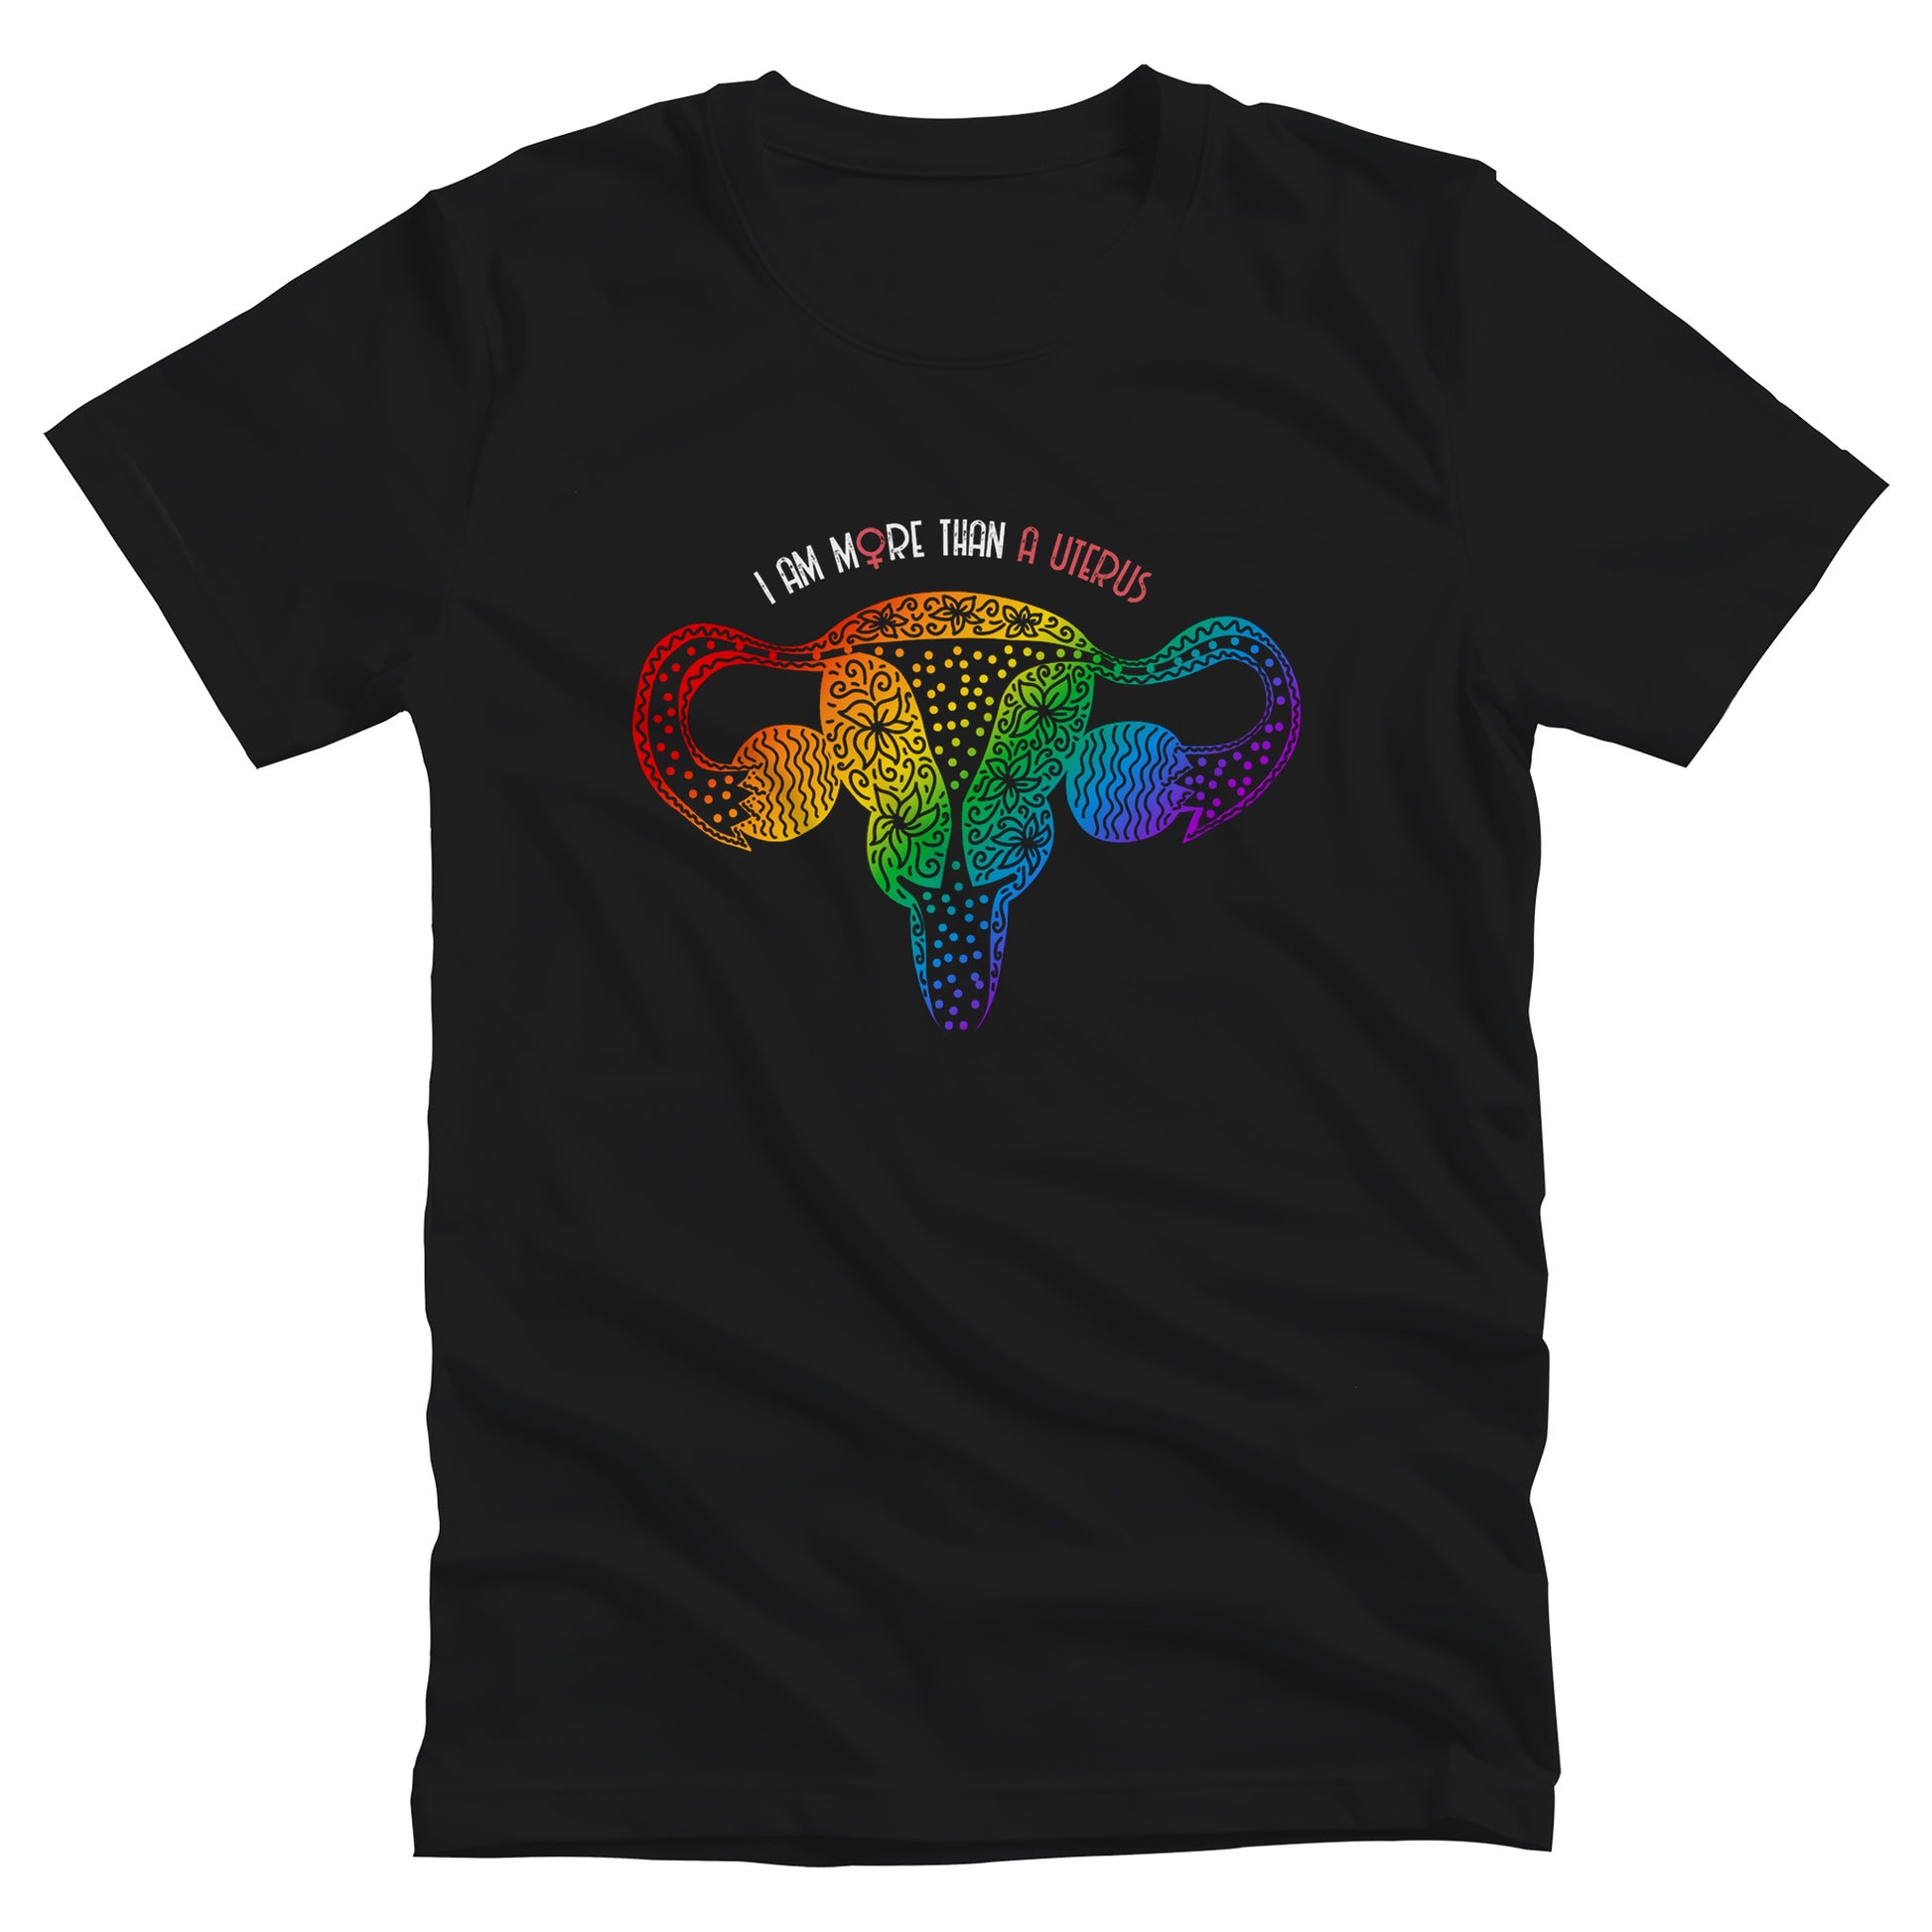 Black unisex t-shirt that says, “I am More Than a Uterus” in all caps. The “O” in “more” is the symbol for the female gender. The text is arched slightly over an illustration of a uterus made from swirls and flowers in a rainbow-gradient color.